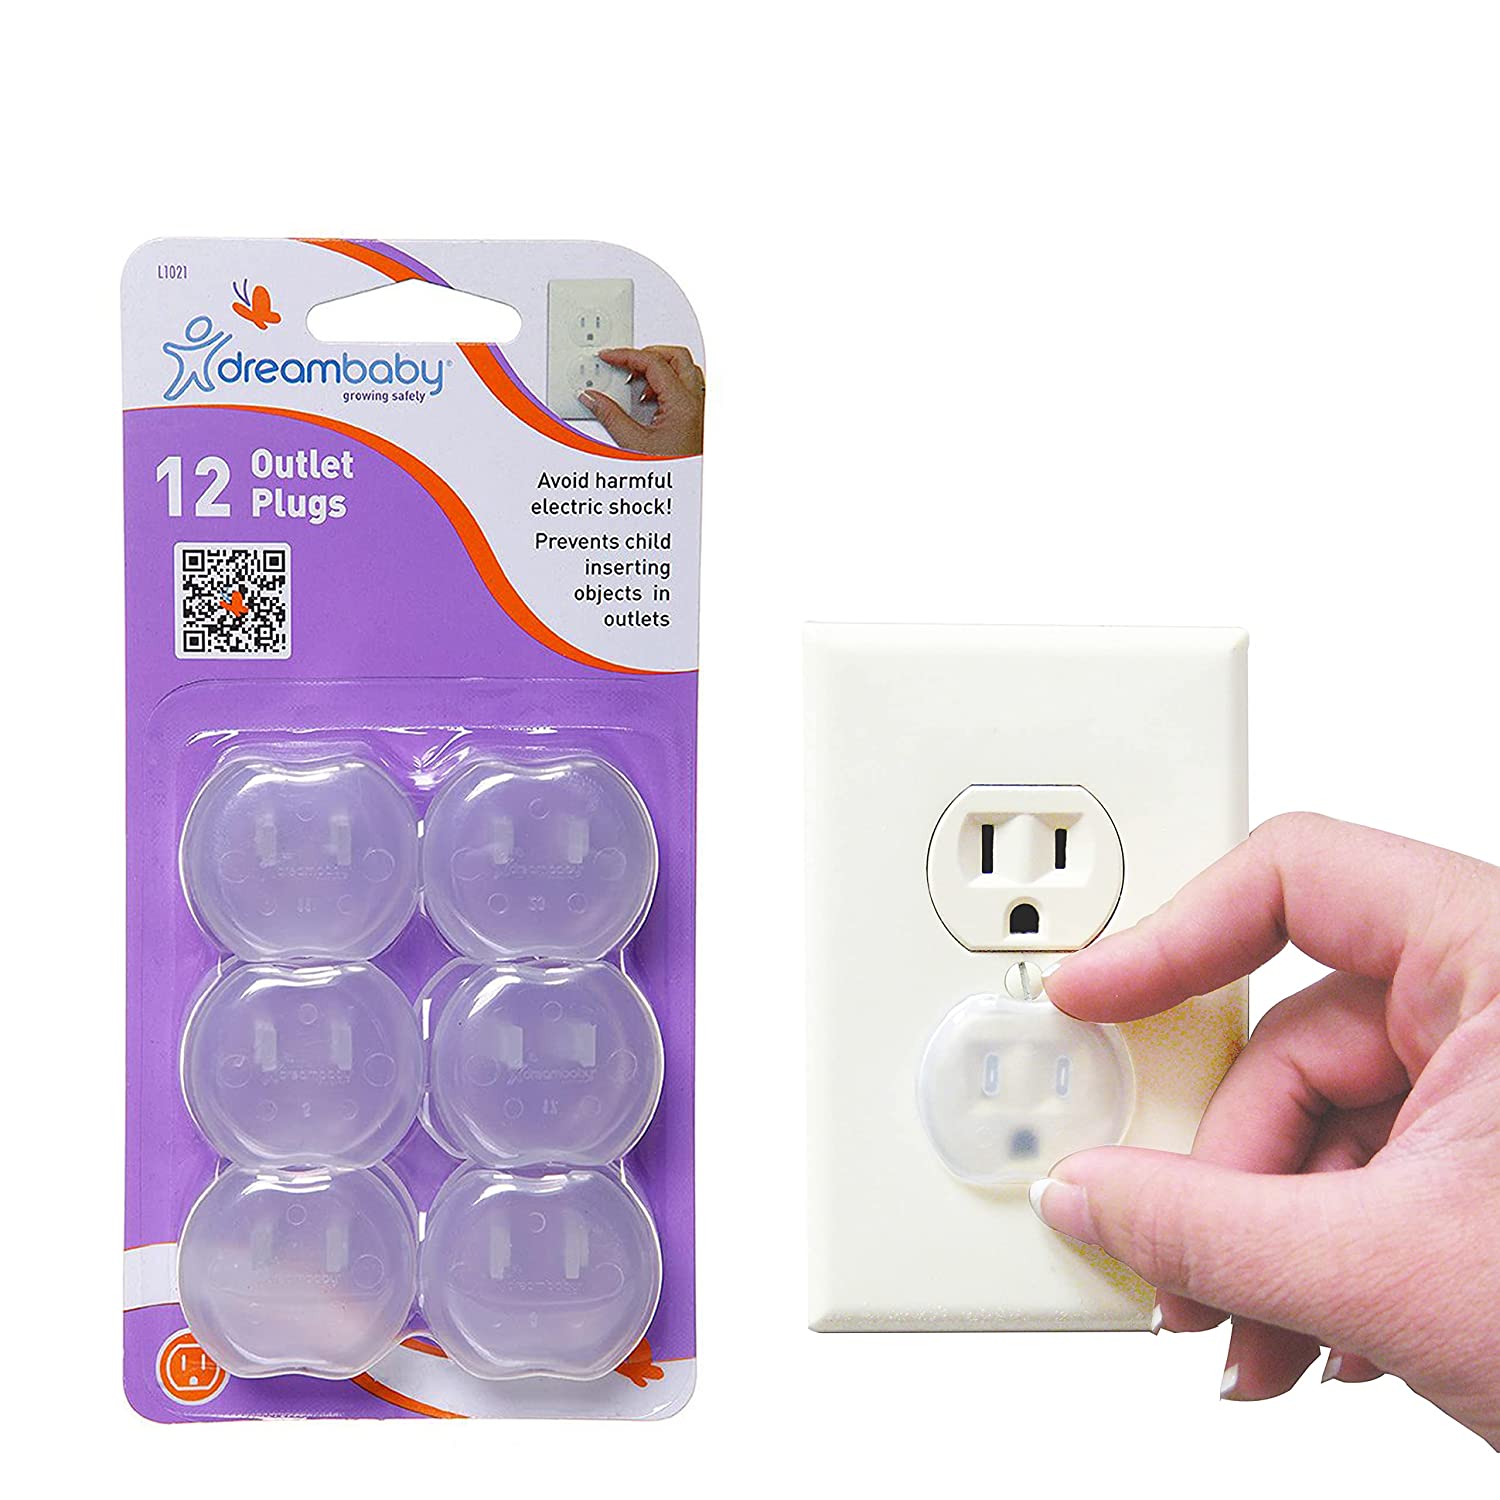 Dreambaby Electric Outlet Socket Plug Covers - Baby Home Safety Plugs Protector Guard - 12 Count - White - Model ‎L1021
